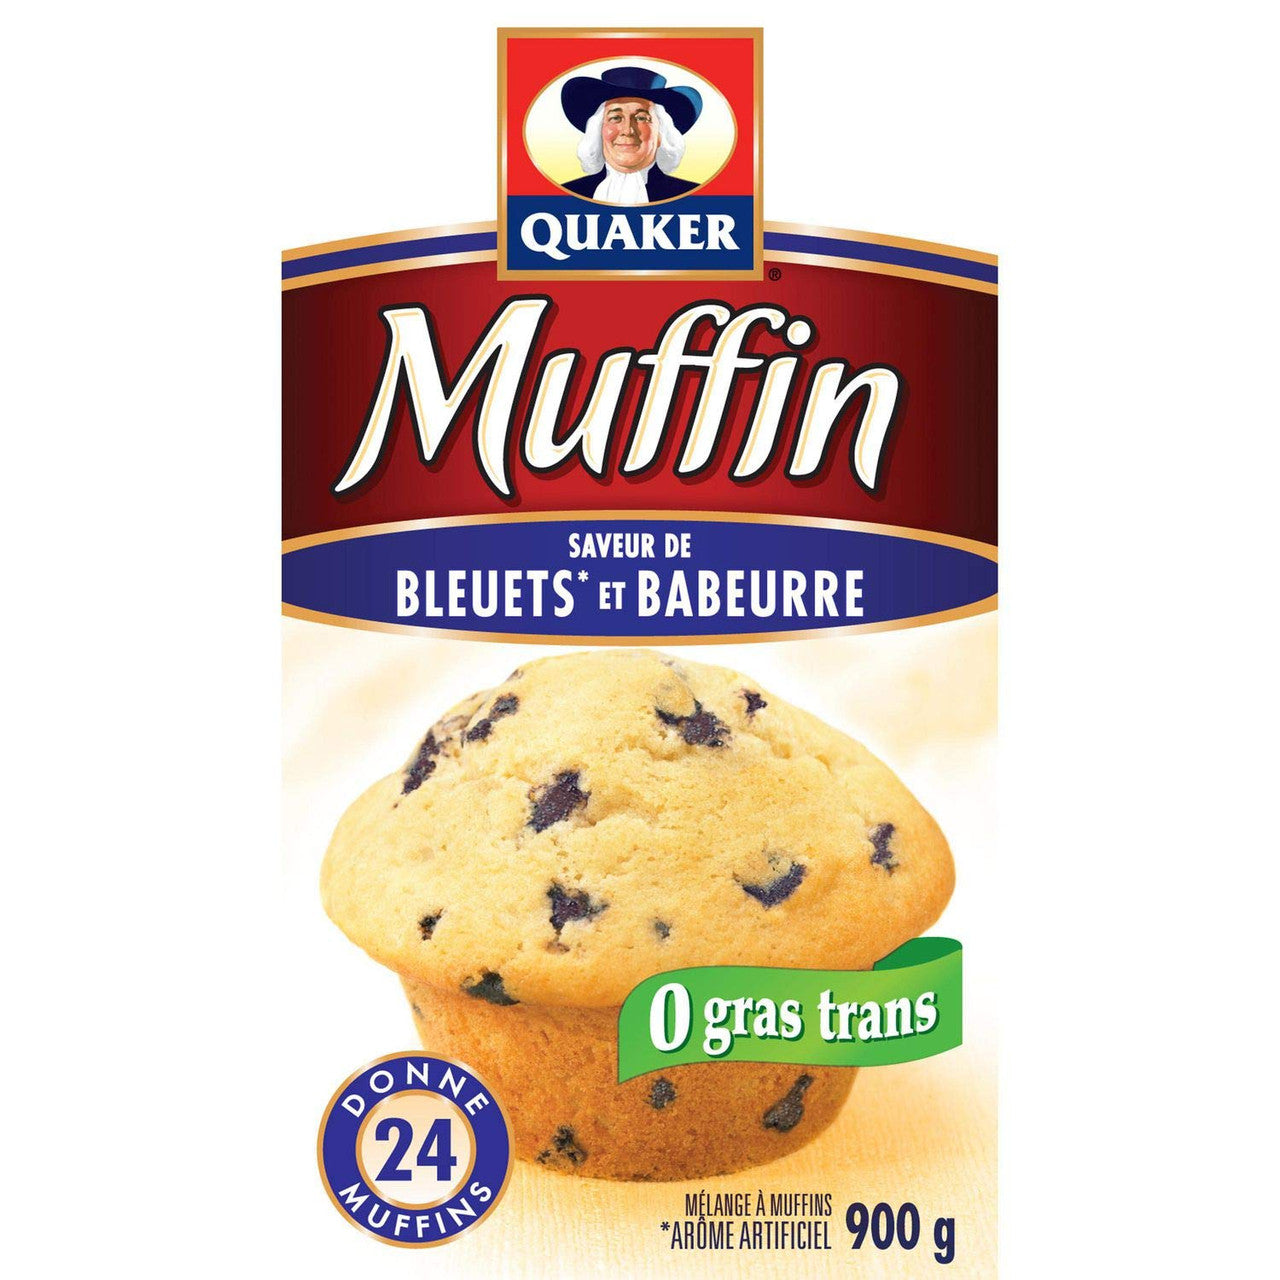 Quaker Muffin Mix Blueberry 900g makes 24 muffins {Imported from Canada}